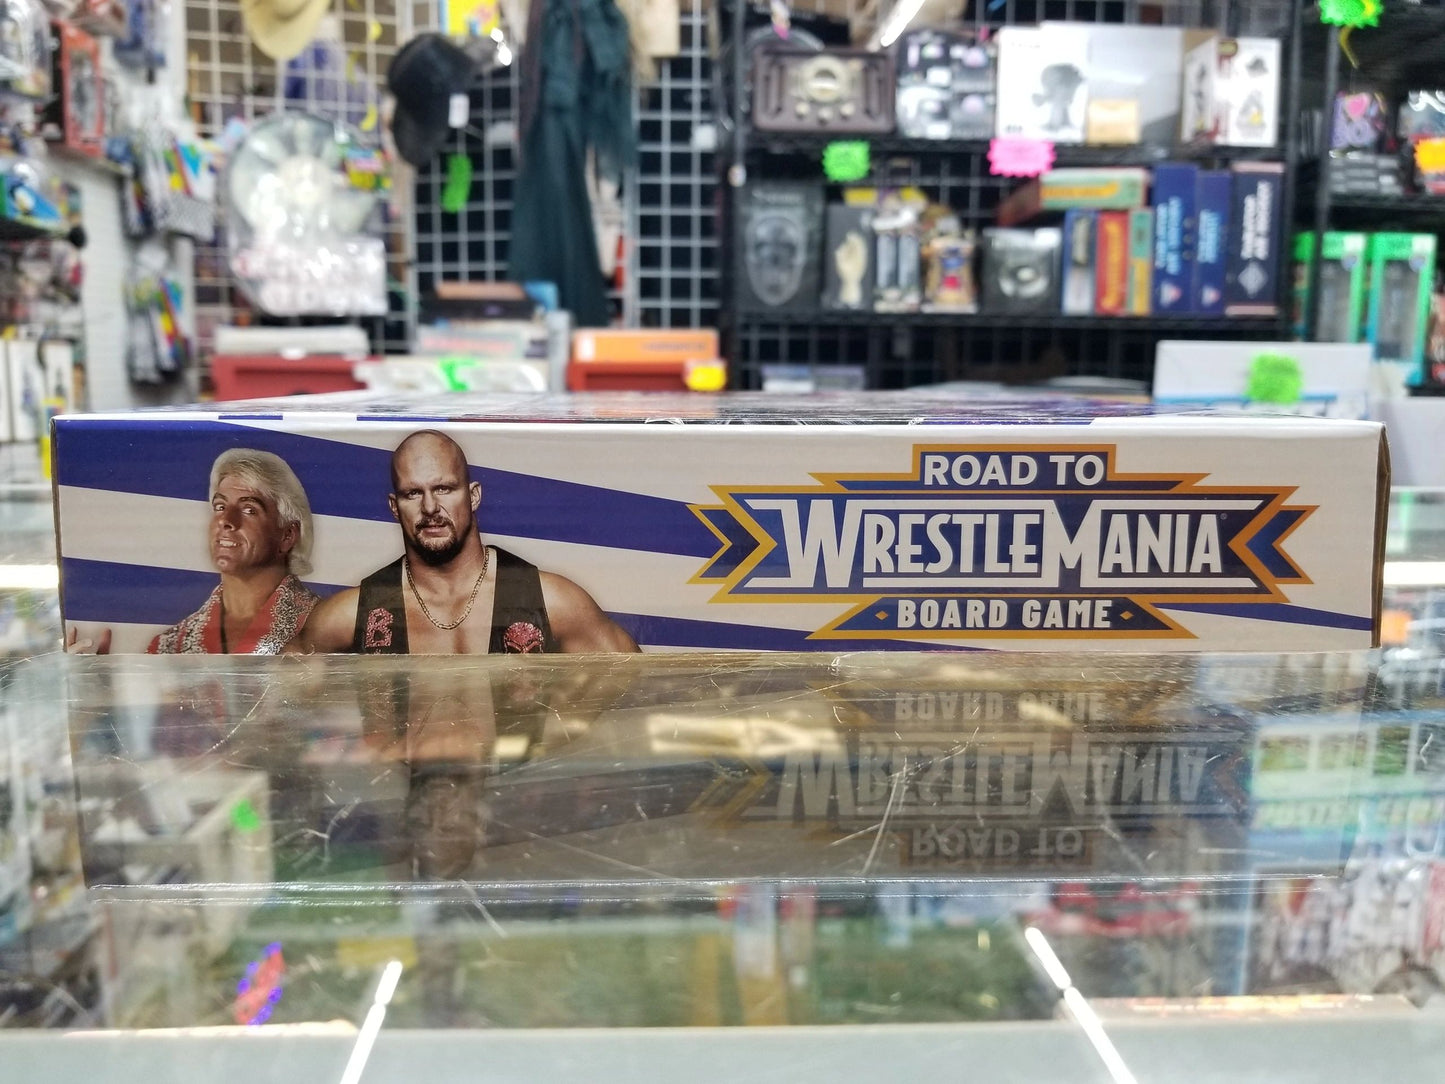 Road To Wrestlemania Board Game